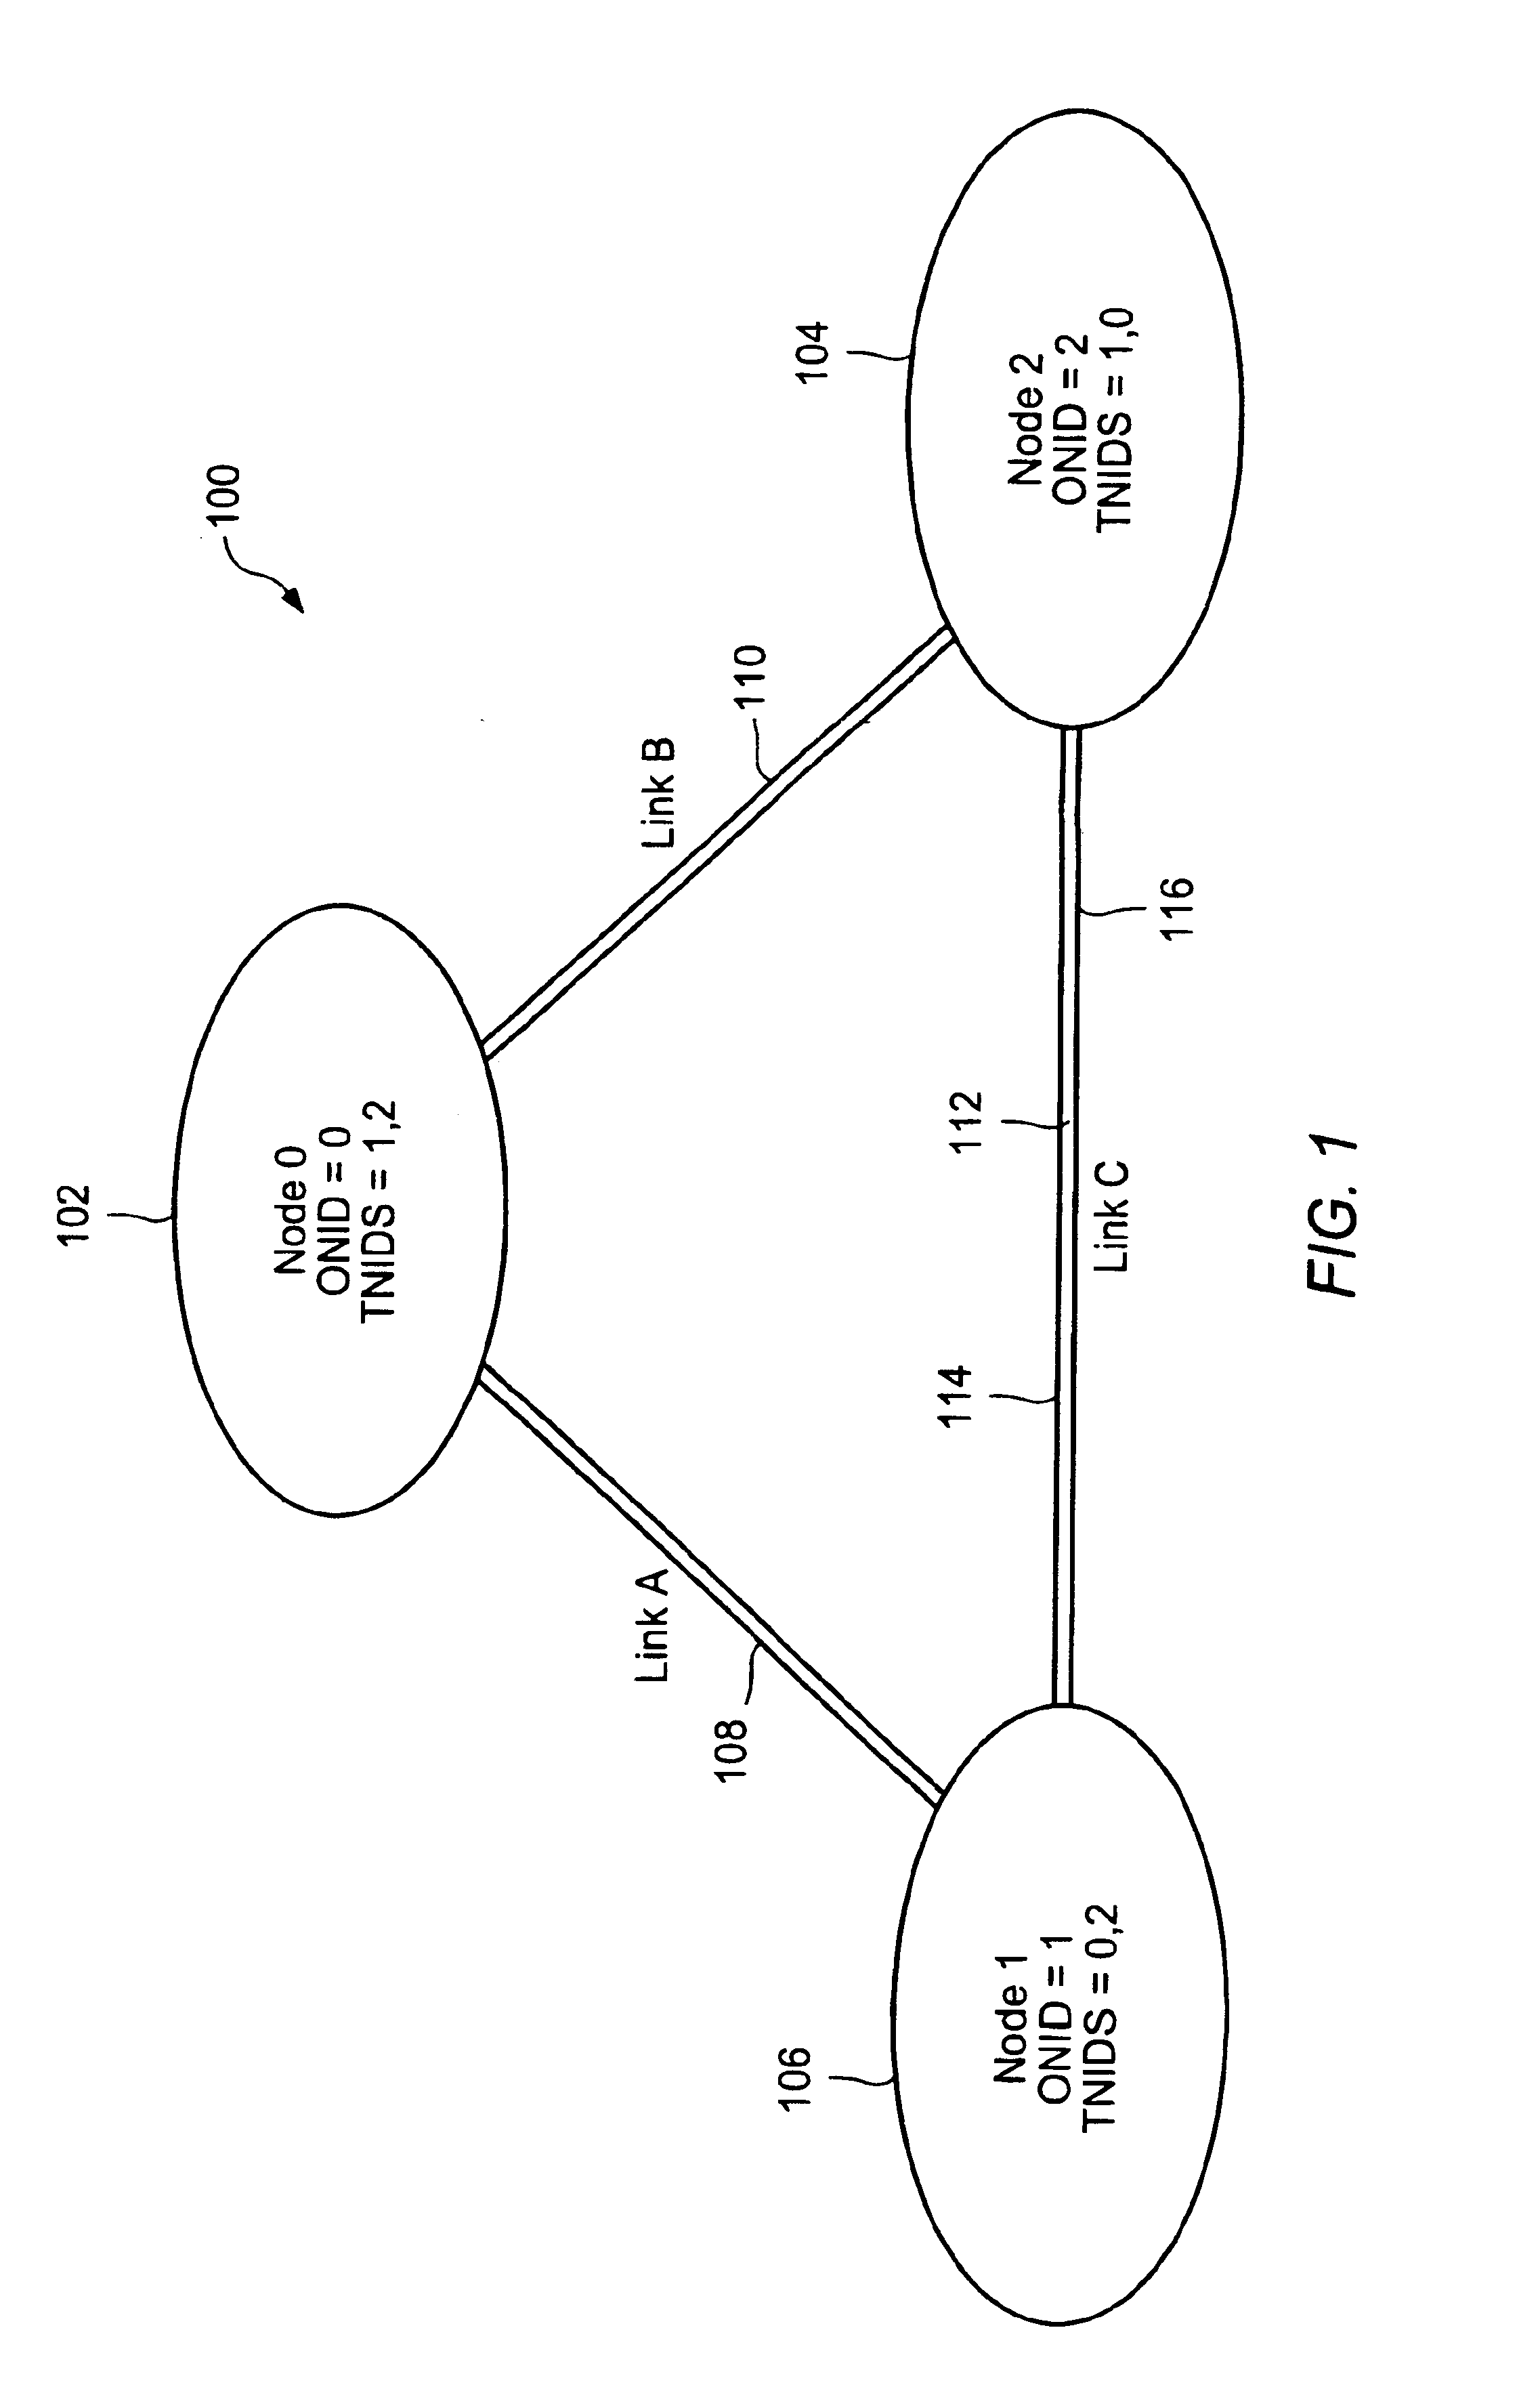 High performance transmission link and interconnect